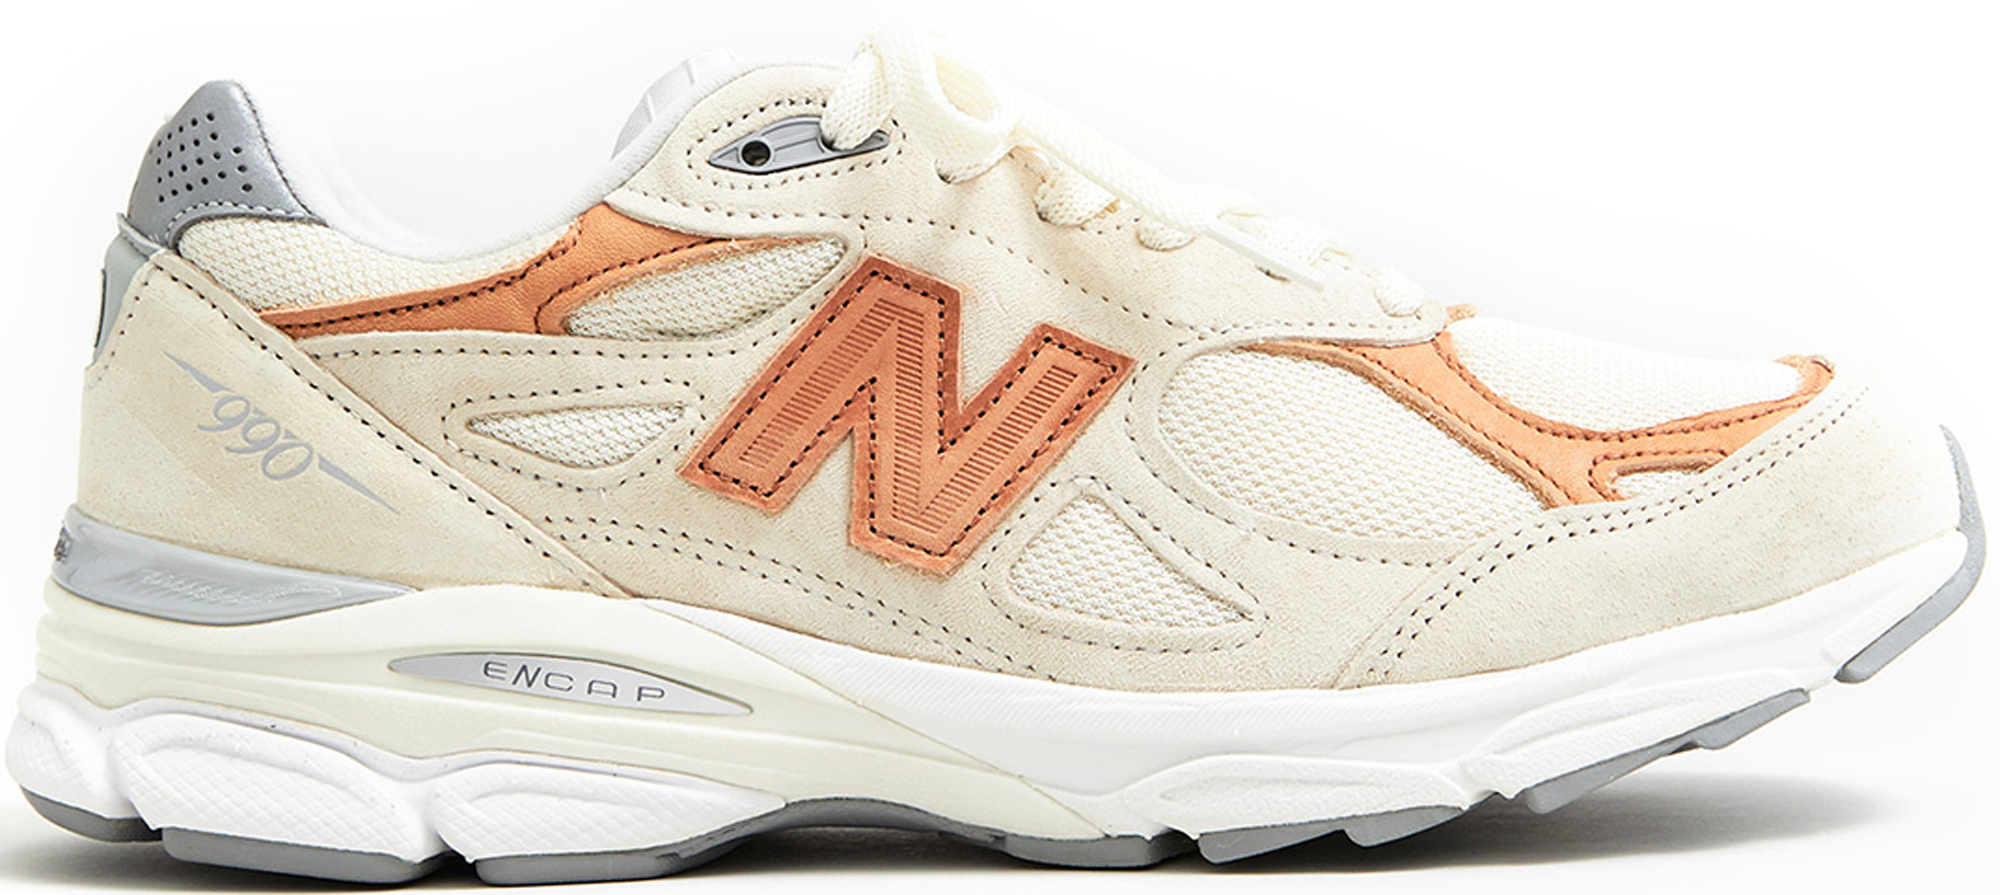 new balance todd snyder pale ale